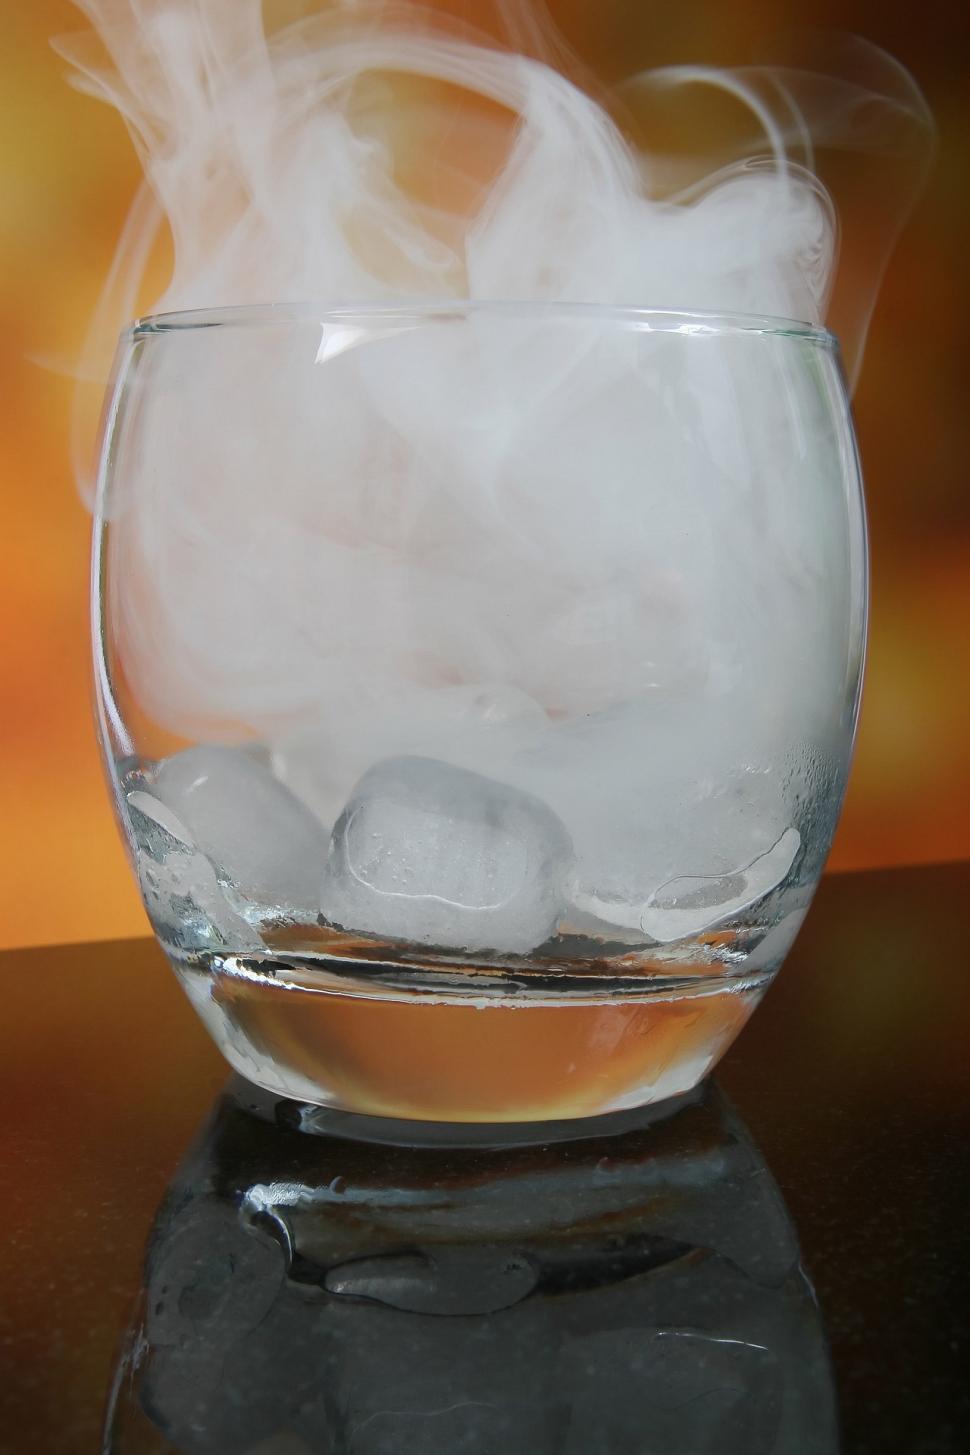 Free Image of Glass Filled With Ice and Water on Table 